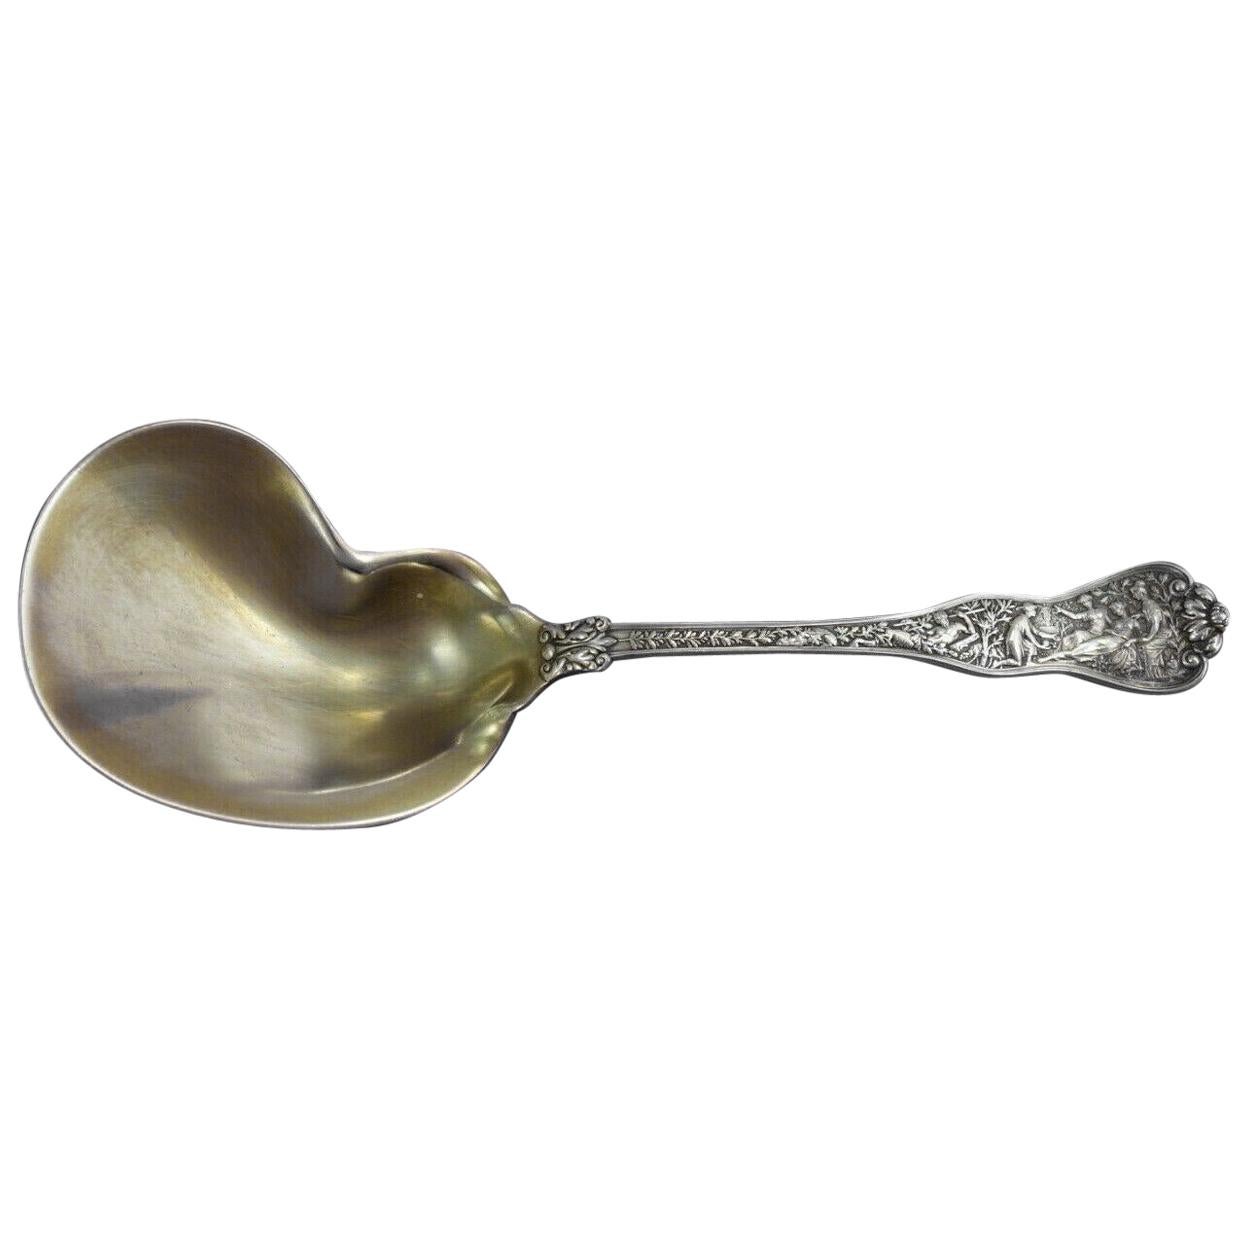 Olympian by Tiffany and Co Sterling Silver Berry Spoon Kidney Shape GW 9 1/2"